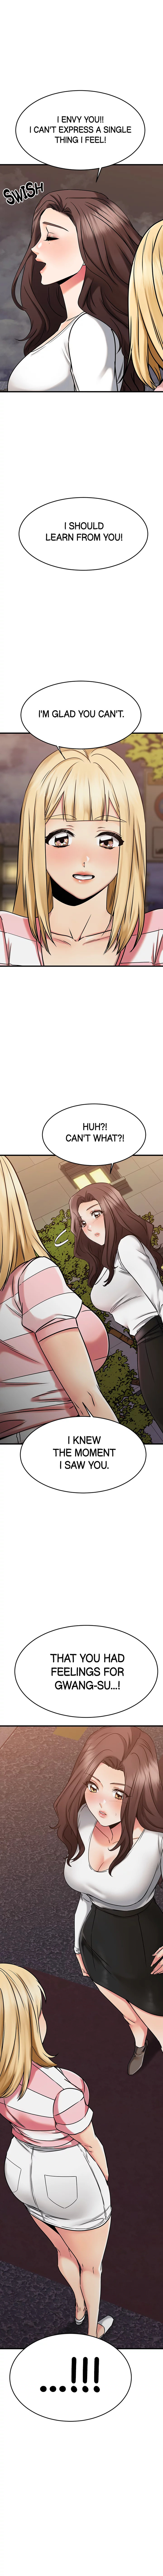 My female friend who crossed the line Chapter 46 - Page 1